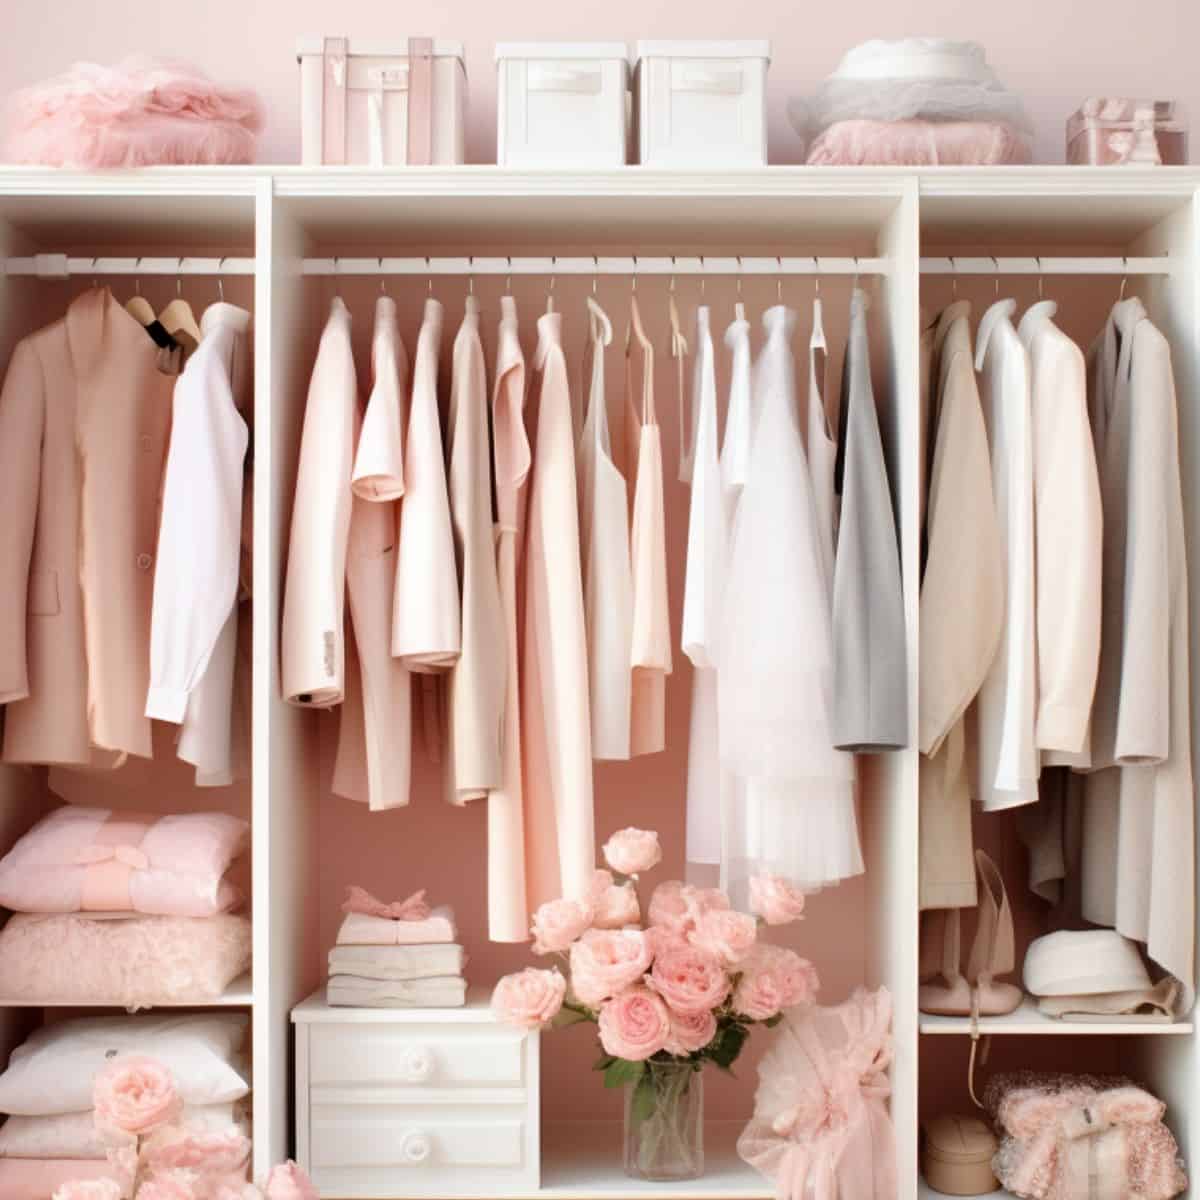 Uplevel Your Capsule Wardrobe Plan with These 4 Secrets